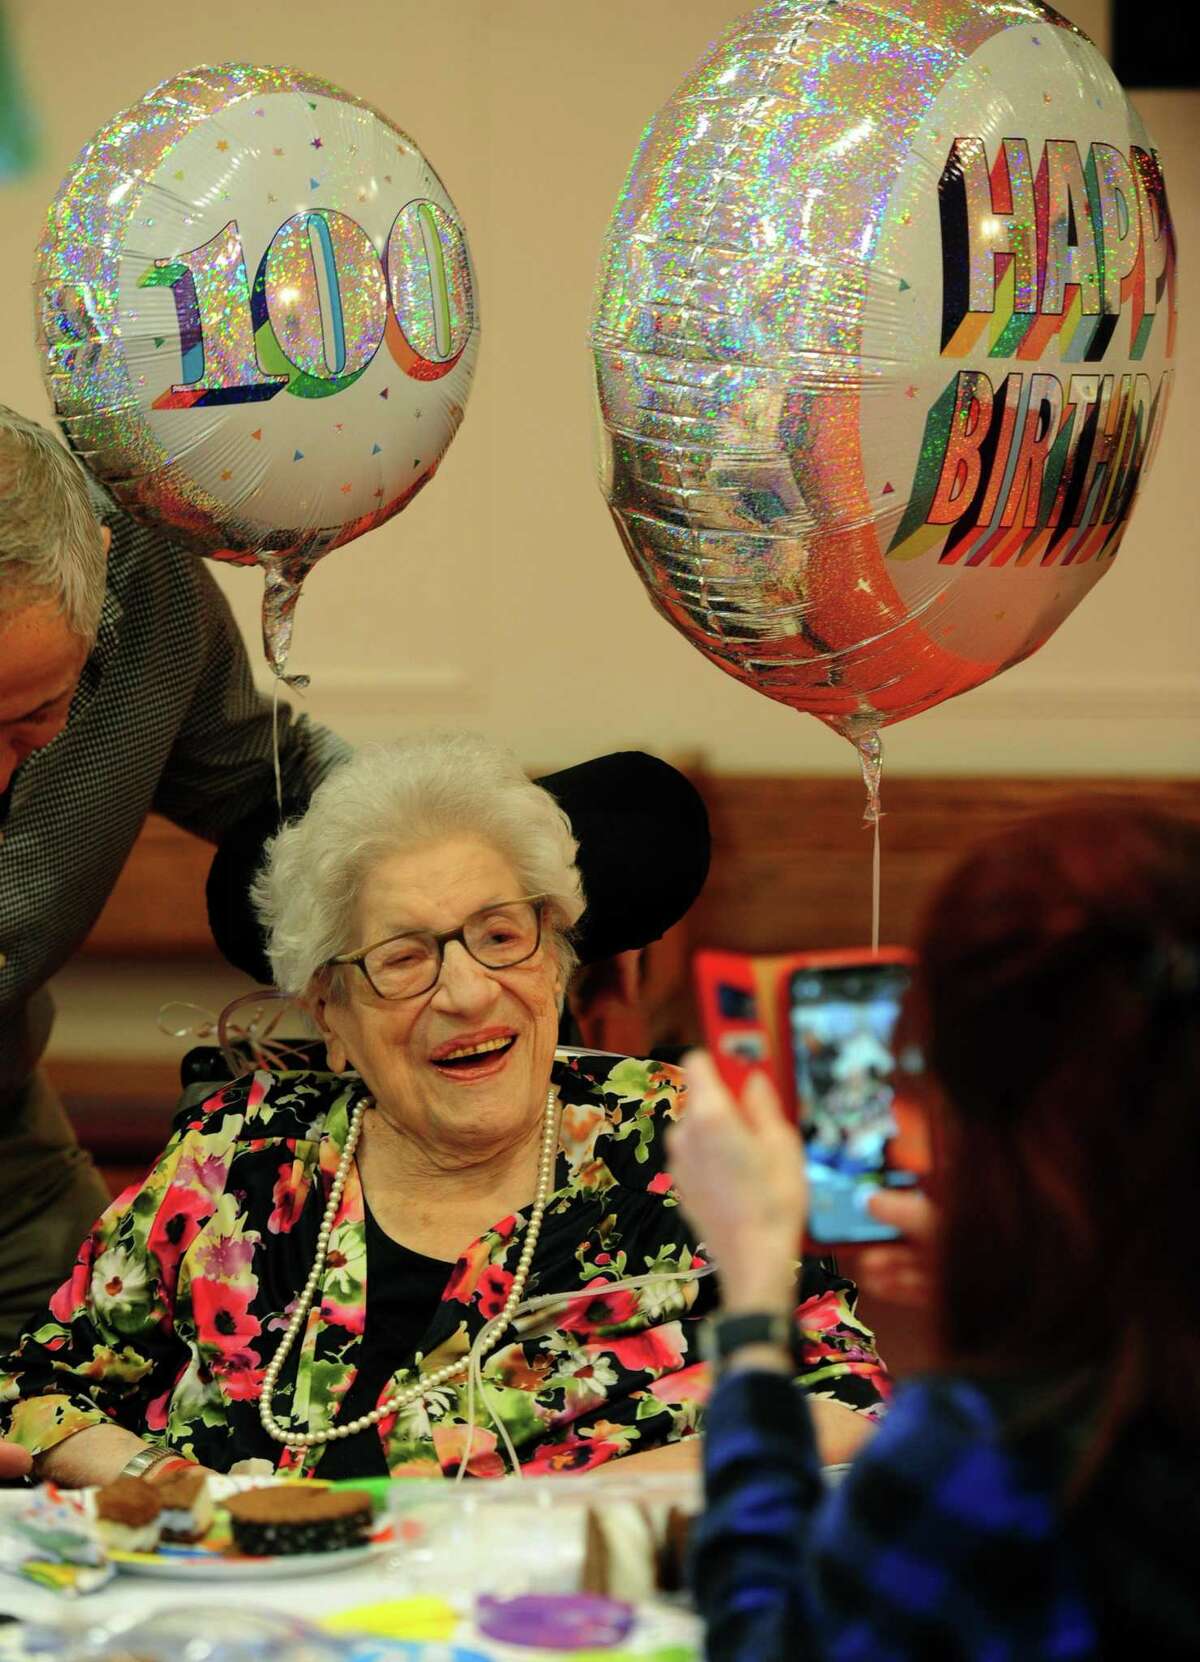 Nathaniel Witherell employee Mary Tate takes a photo of Frances Carino as she celebrates her 100th birthday with her family at the senior care facility in Greenwich, Conn., on Friday March 4, 2022. At left is her son Peter and granddaughter Elizabeth.